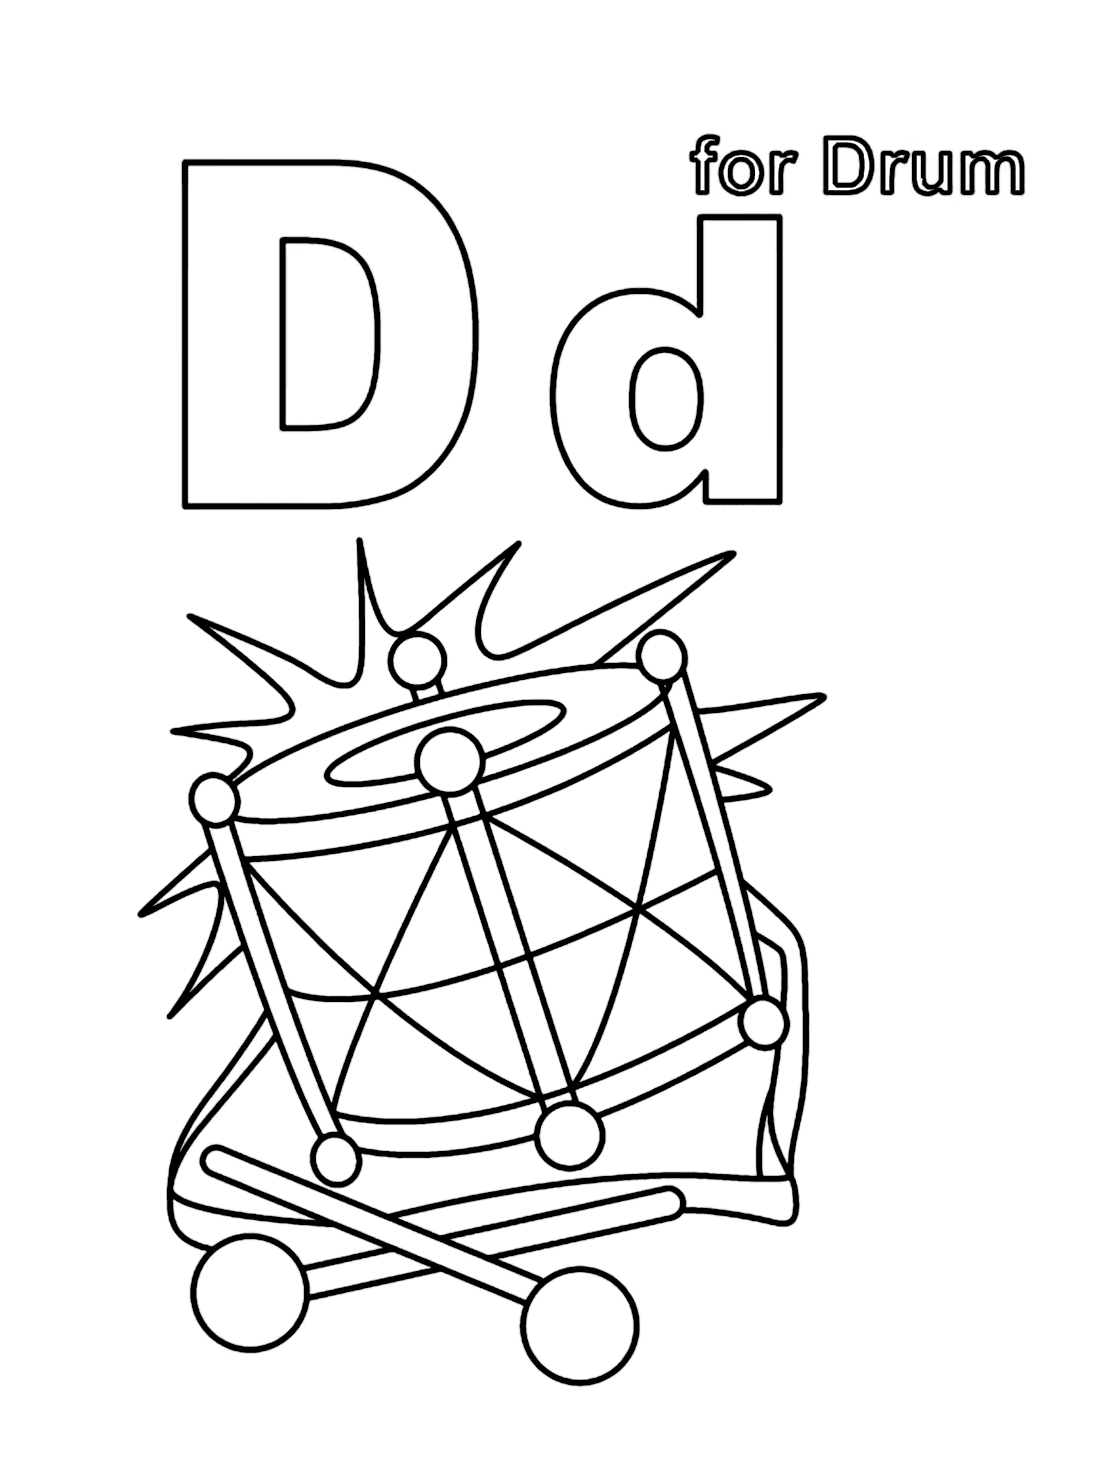 Drumline Coloring Pages